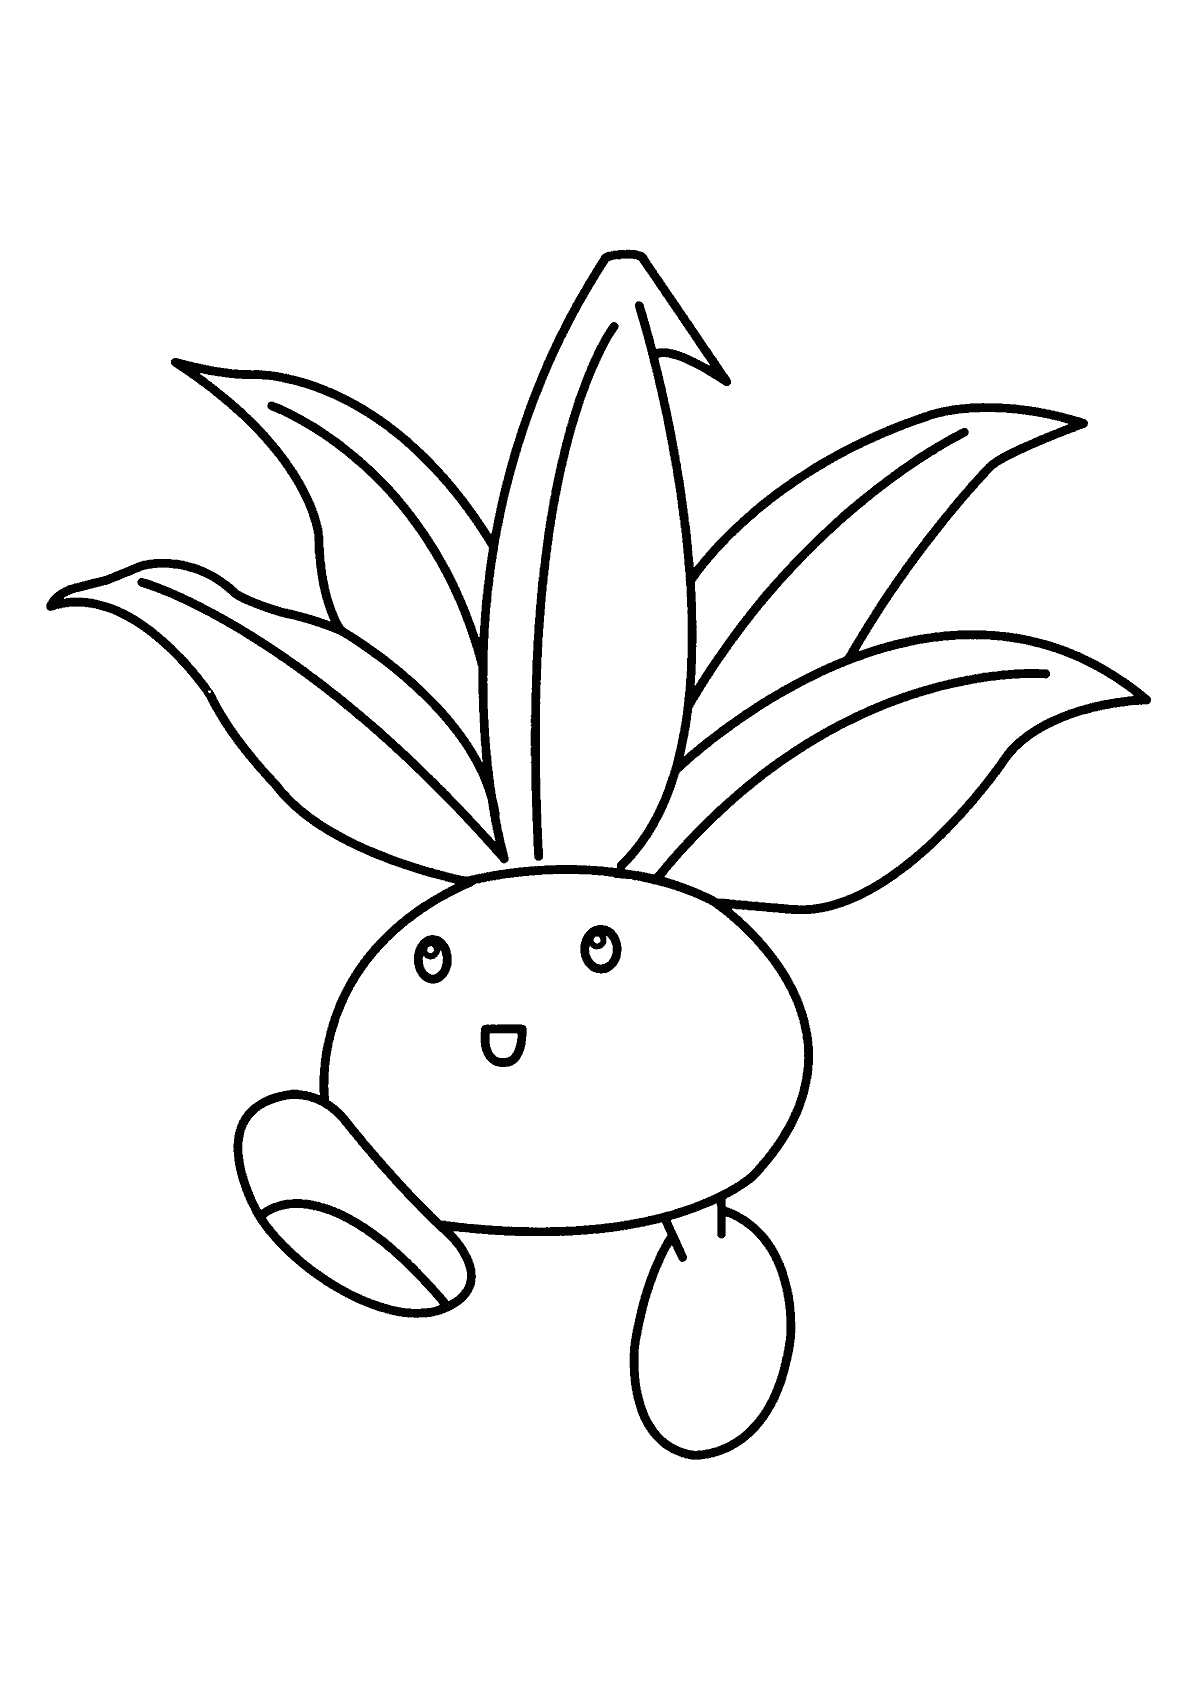 coloring page: Pokémon Oddish is a small dark-blue Pokémon w/ round body, large oval eyes, 2 small leaves on head & a leaf on back, 4 small legs.